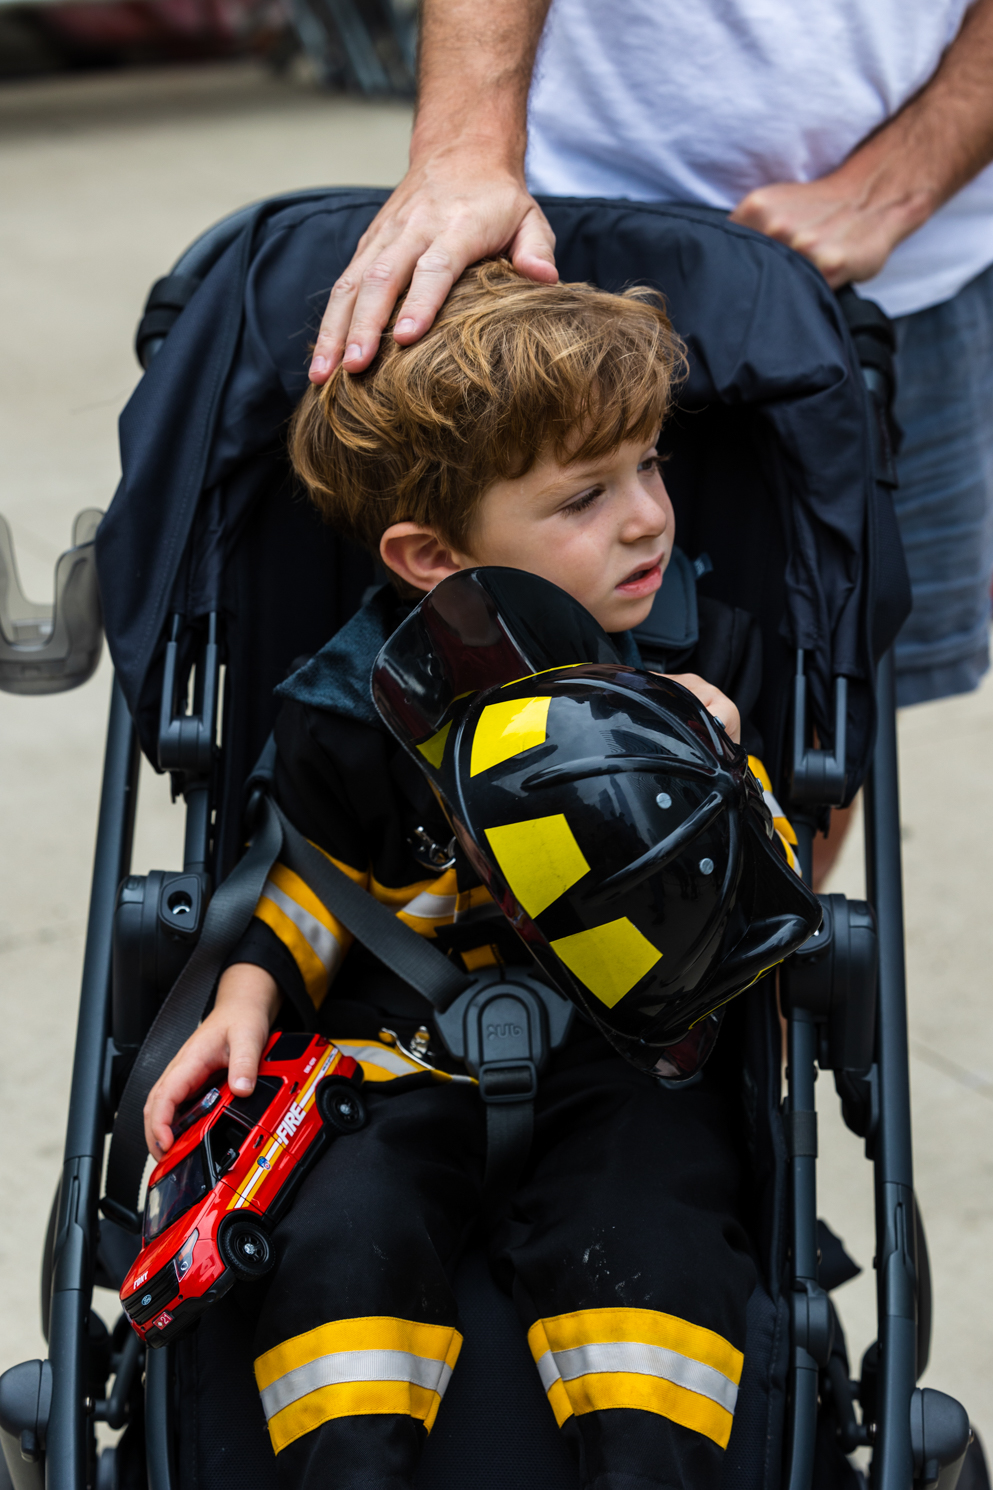 An infant boy sits in a stroller dressed in a firefighter costume.